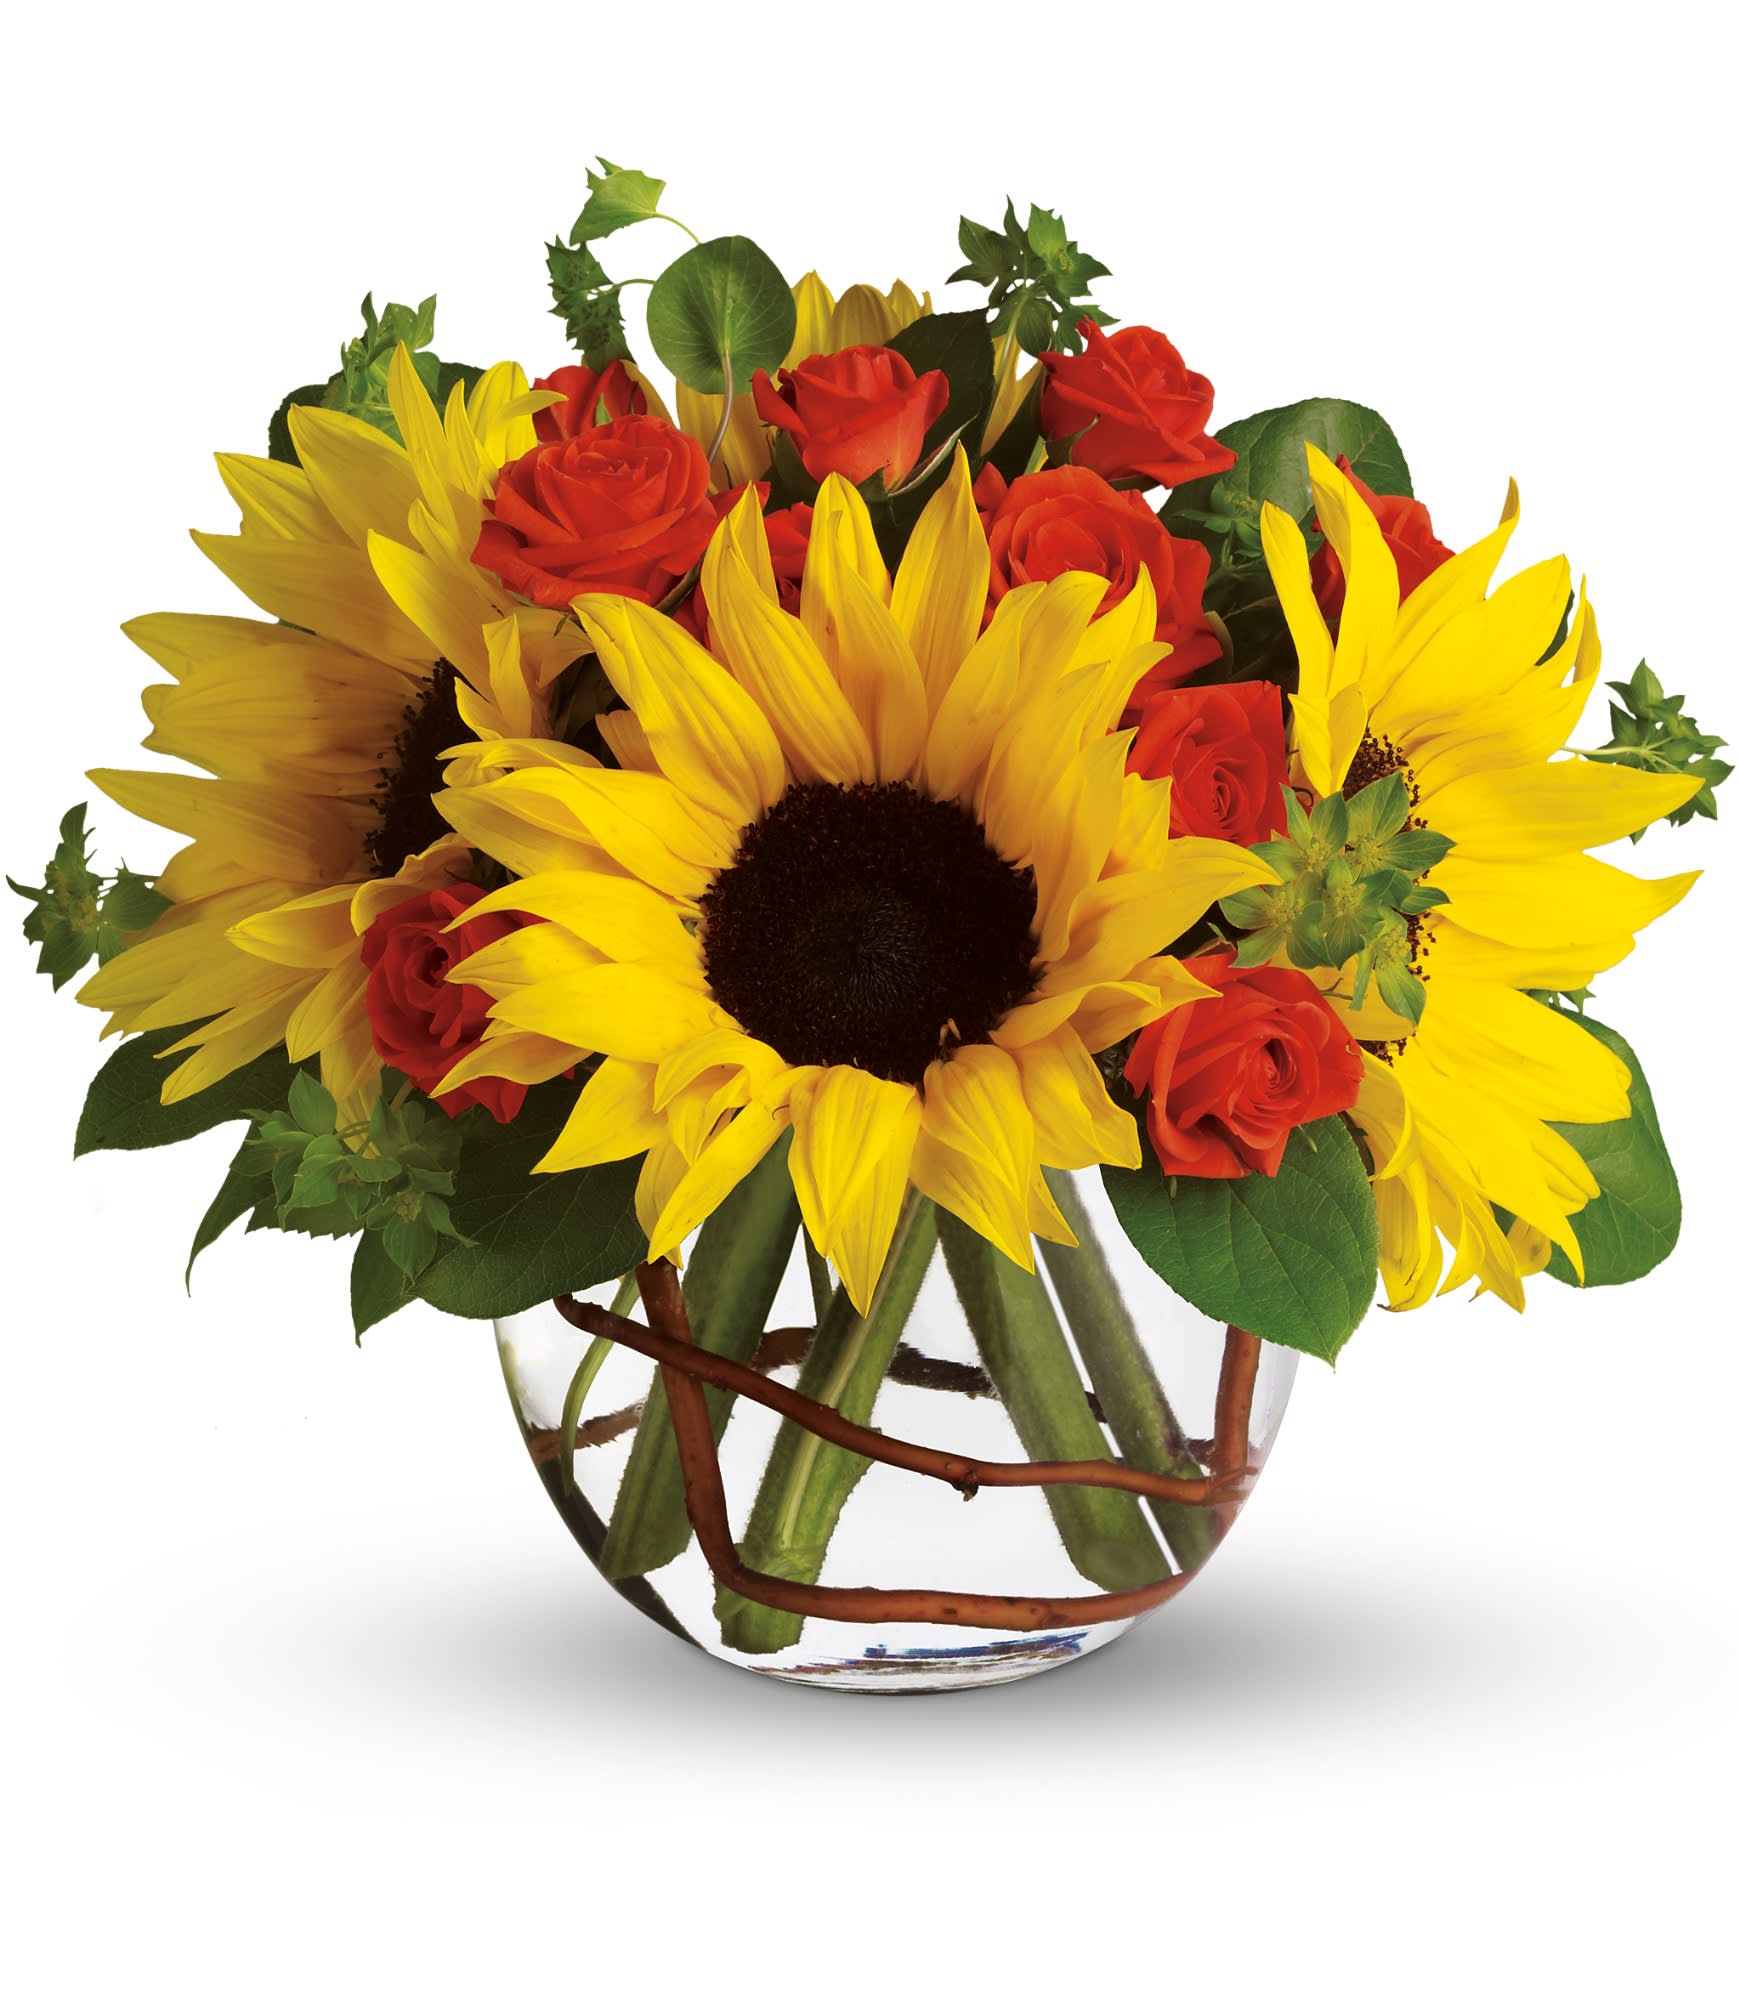 sunflowers and roses in a small glass vase